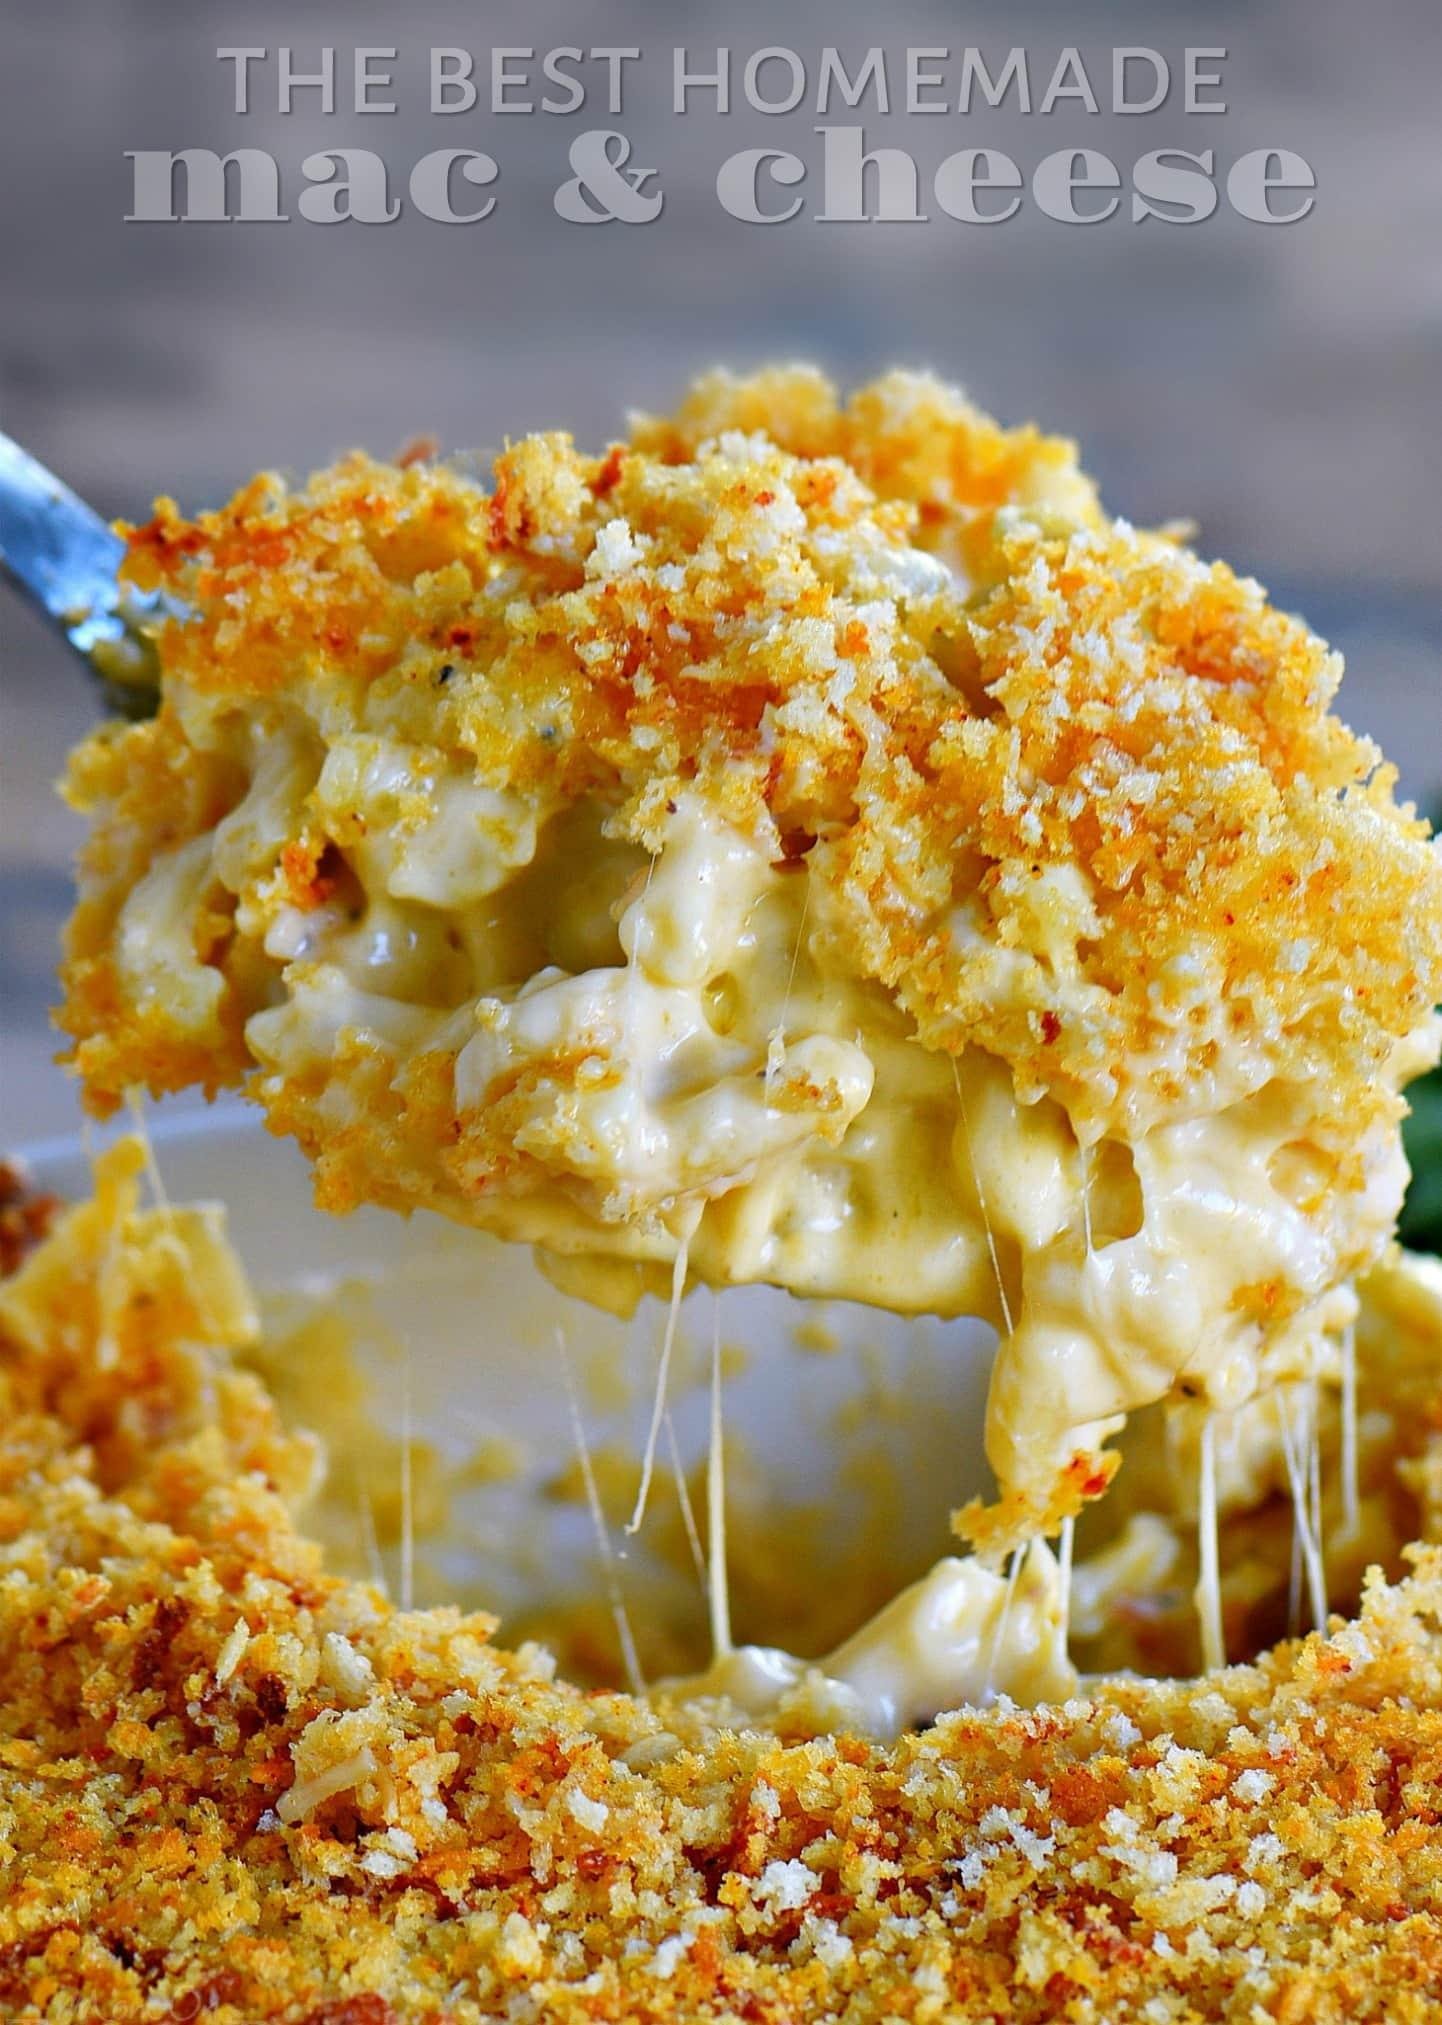 Classic comfort food: How to make the perfect mac and cheese every time